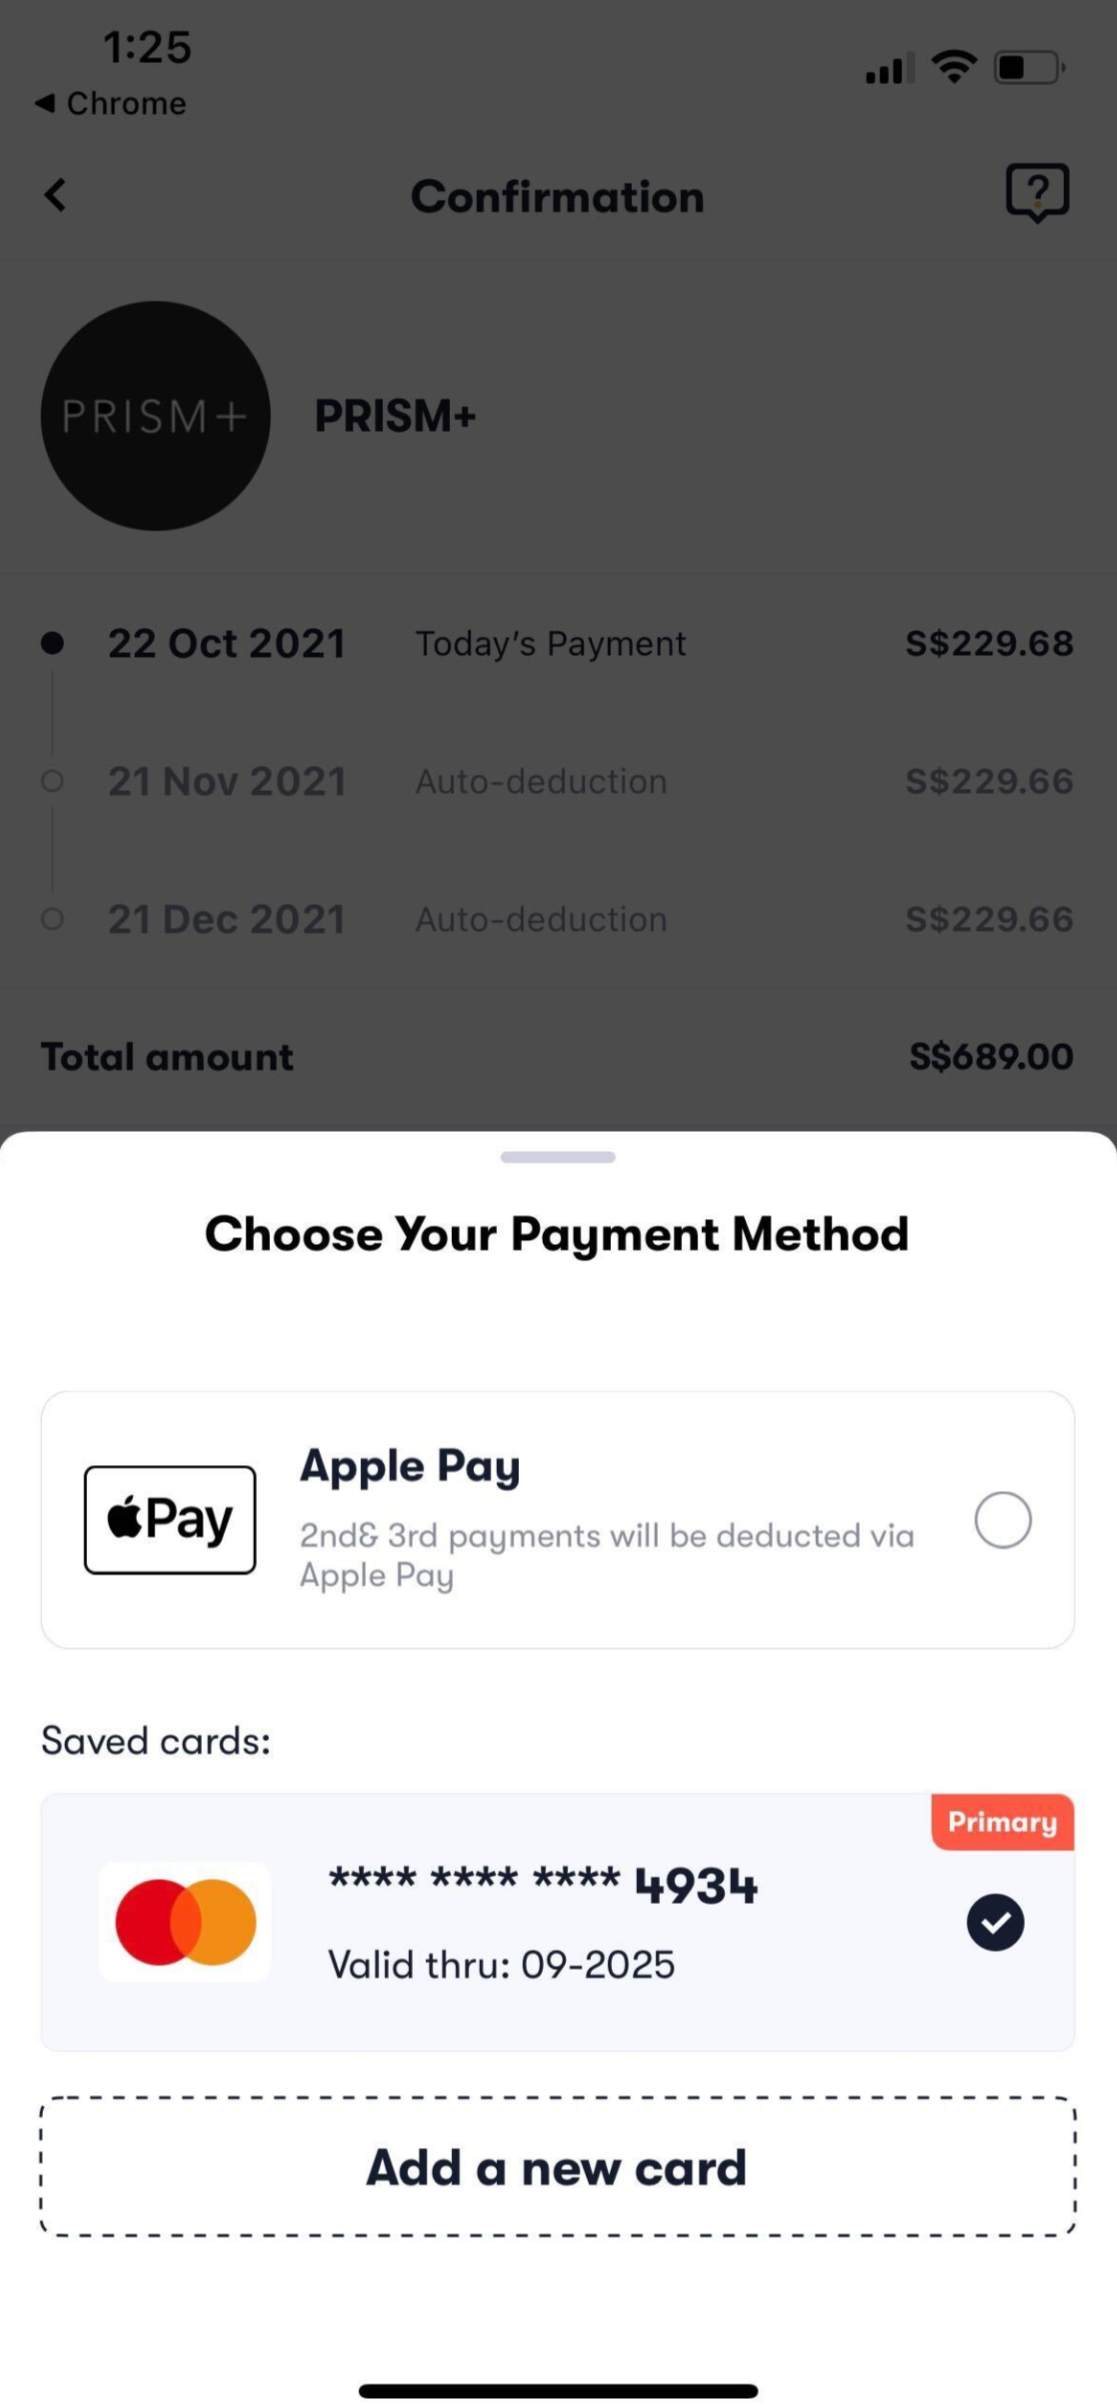 Confirm the payment method that you would like to use